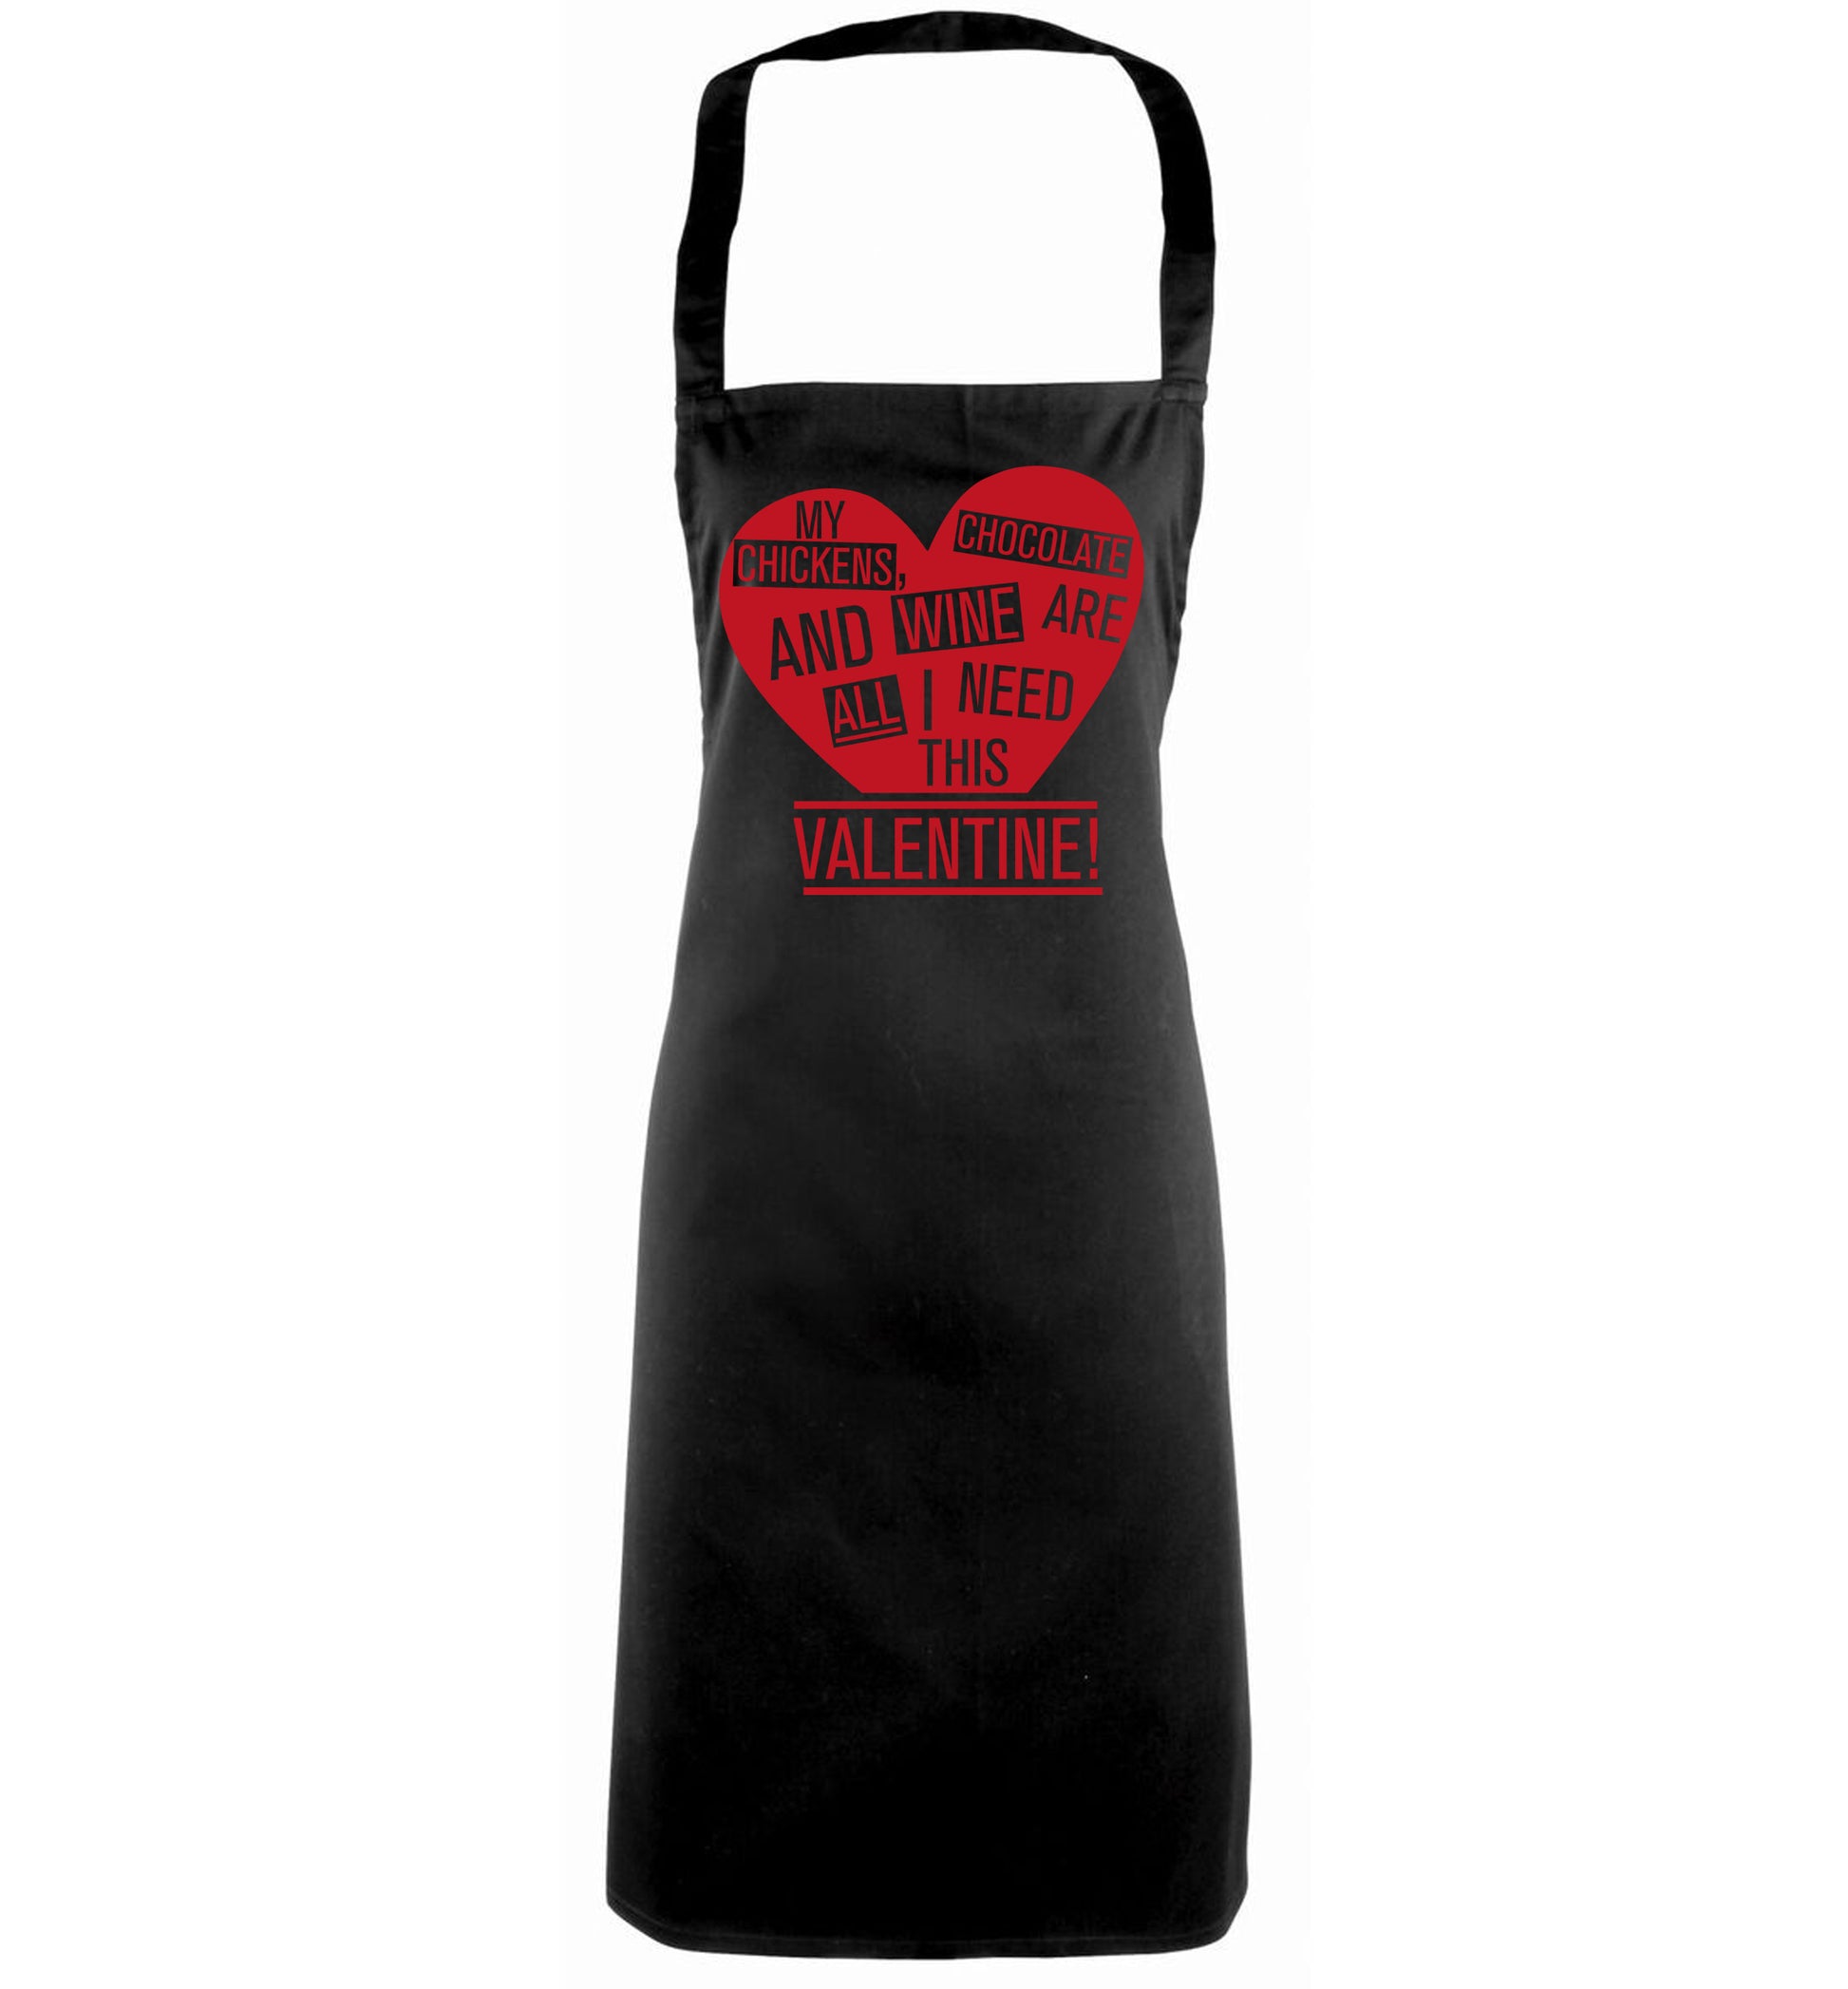 My chickens, chocolate and wine are all I need this valentine! black apron